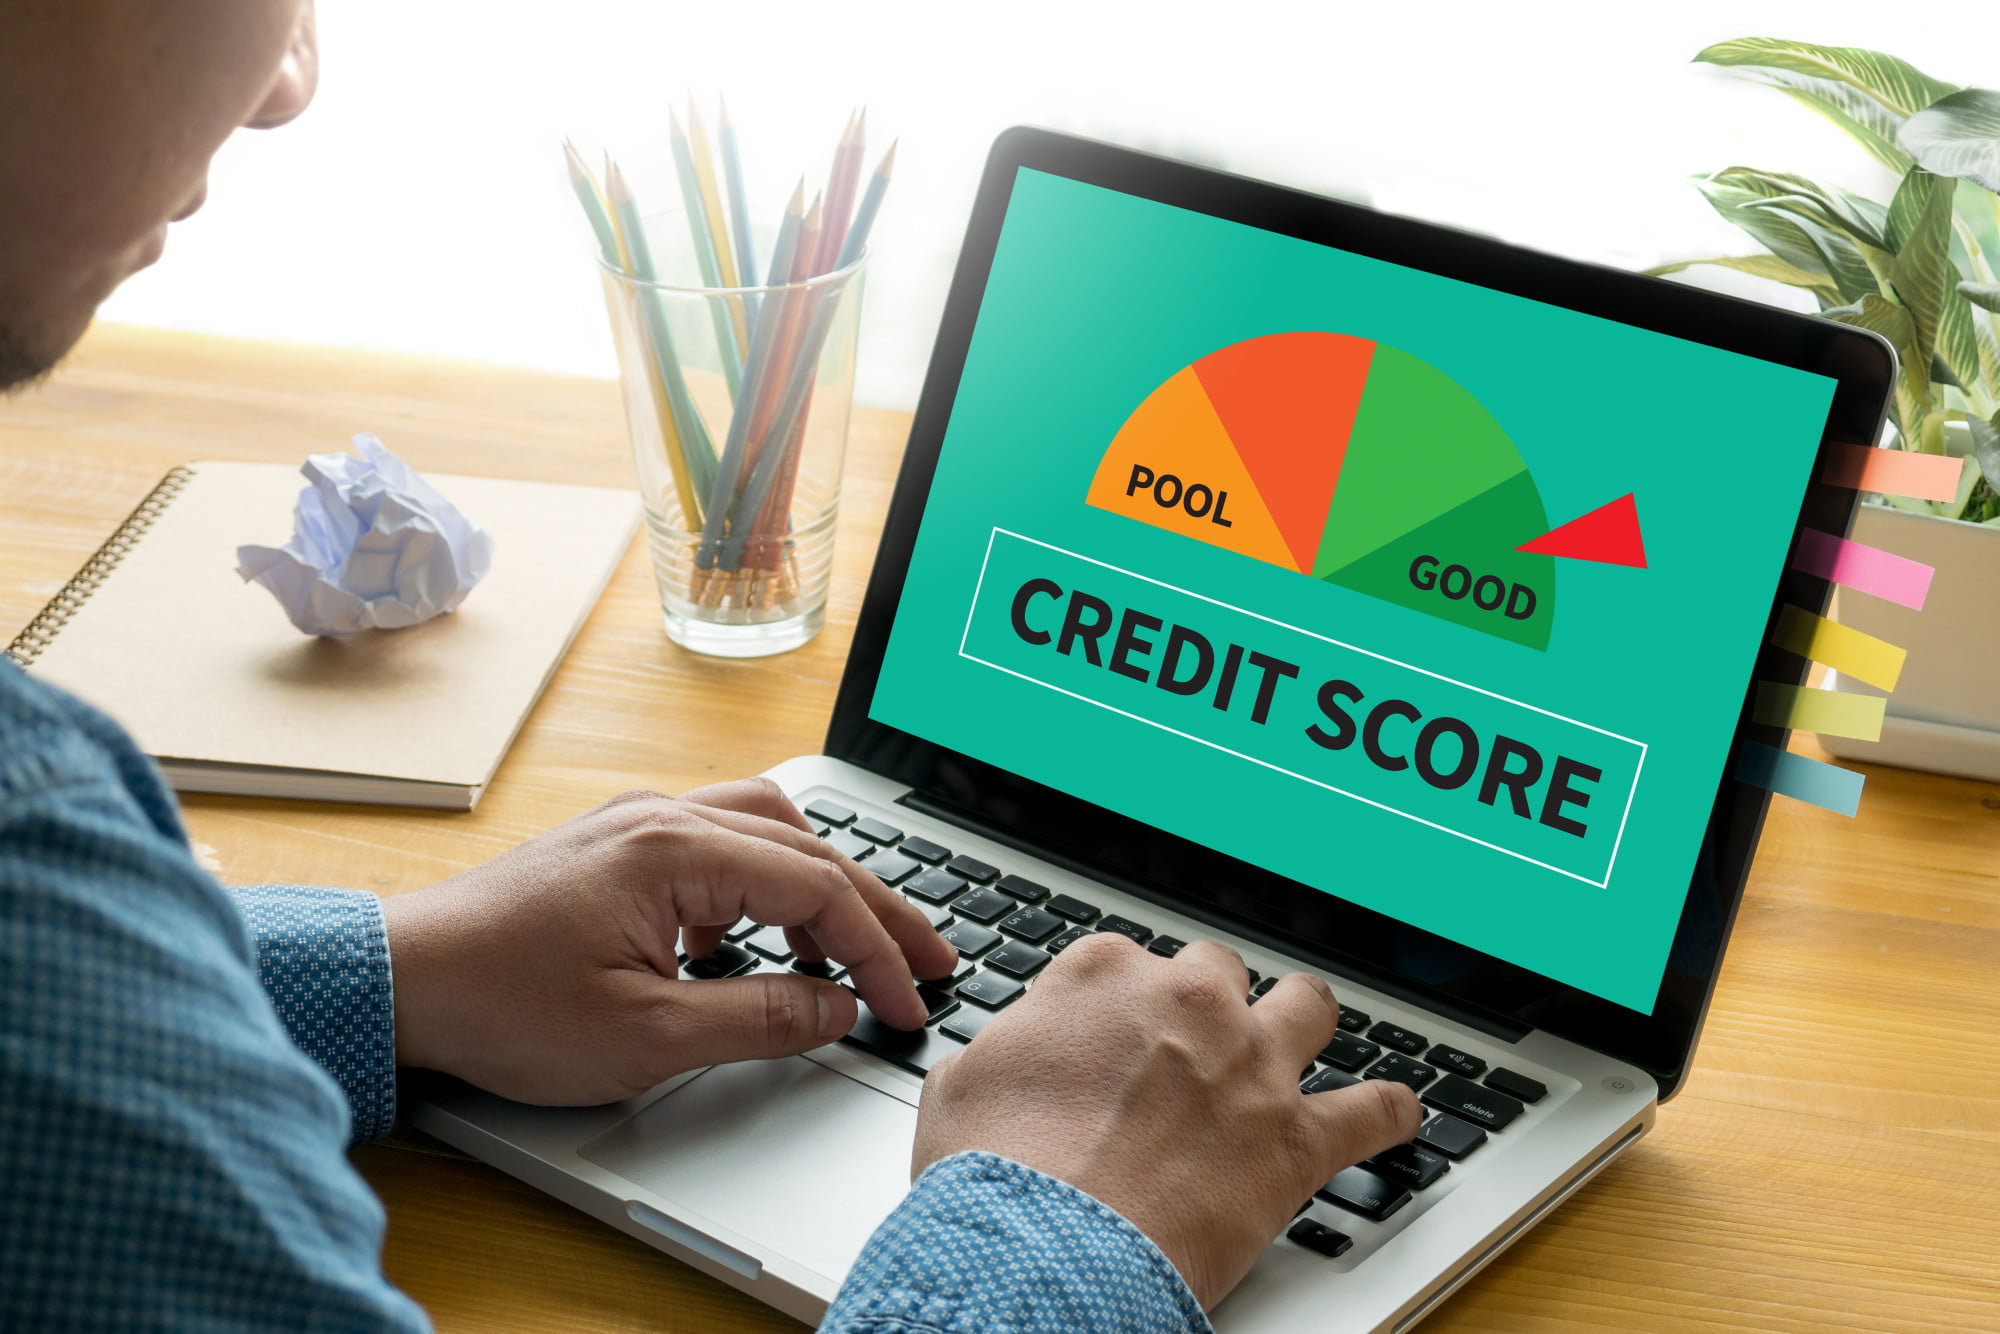 Are you looking for the best ways to build business credit? Make sure to avoid these 5 common mistakes when building business credit.